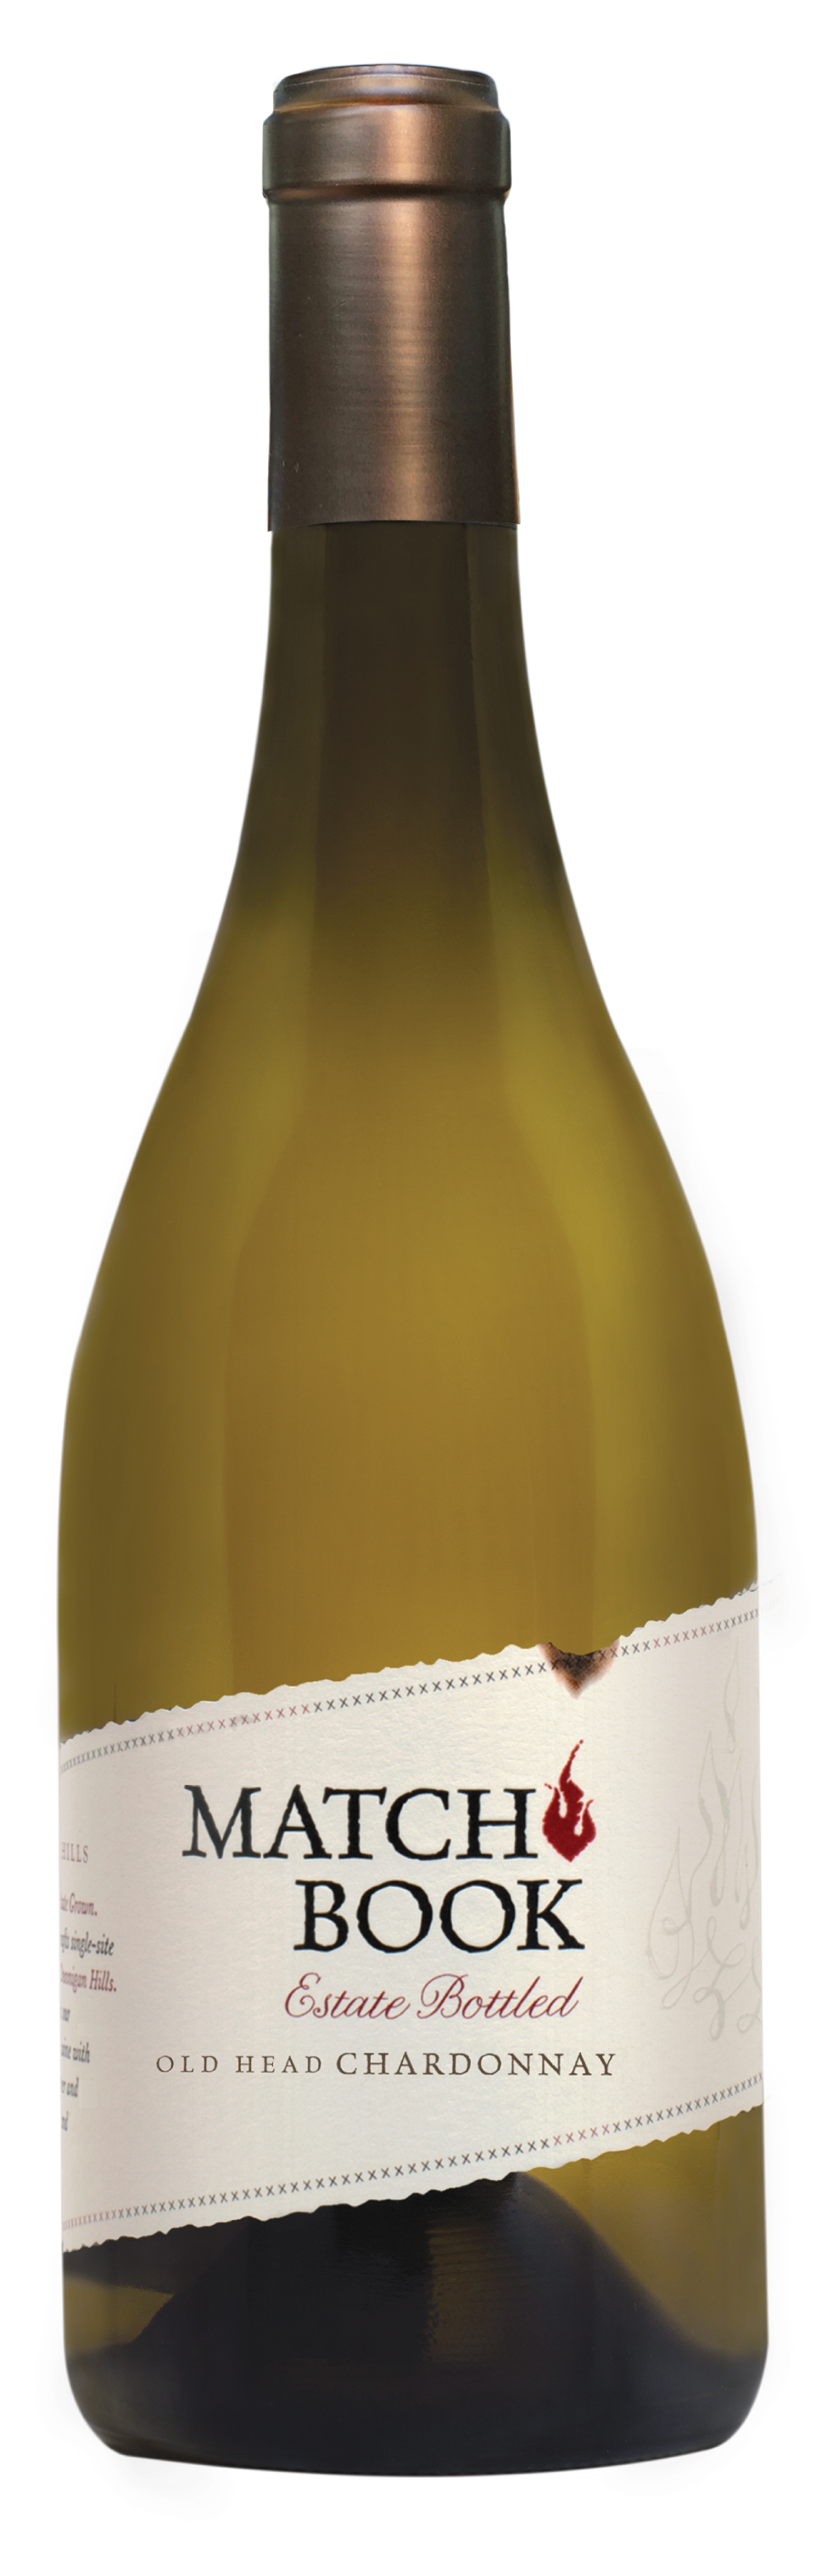 Product Image for 2020 Matchbook Old Head Chardonnay